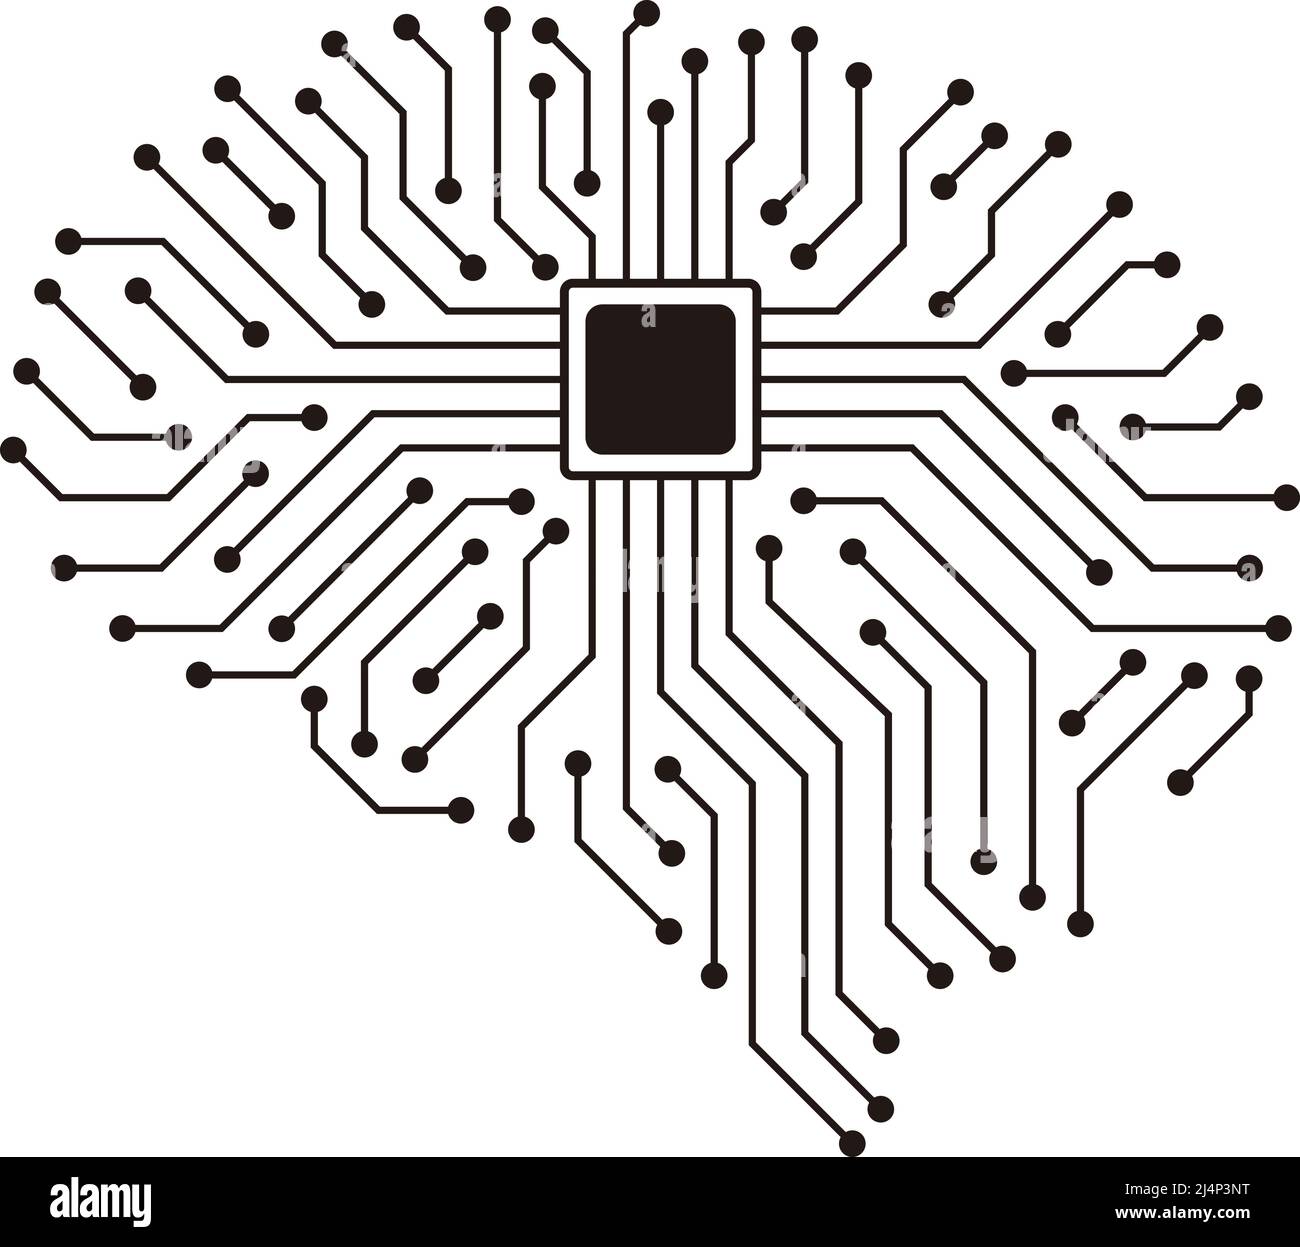 circuit board, chip and brain, Artificial intelligence concept. vector illustration Stock Vector